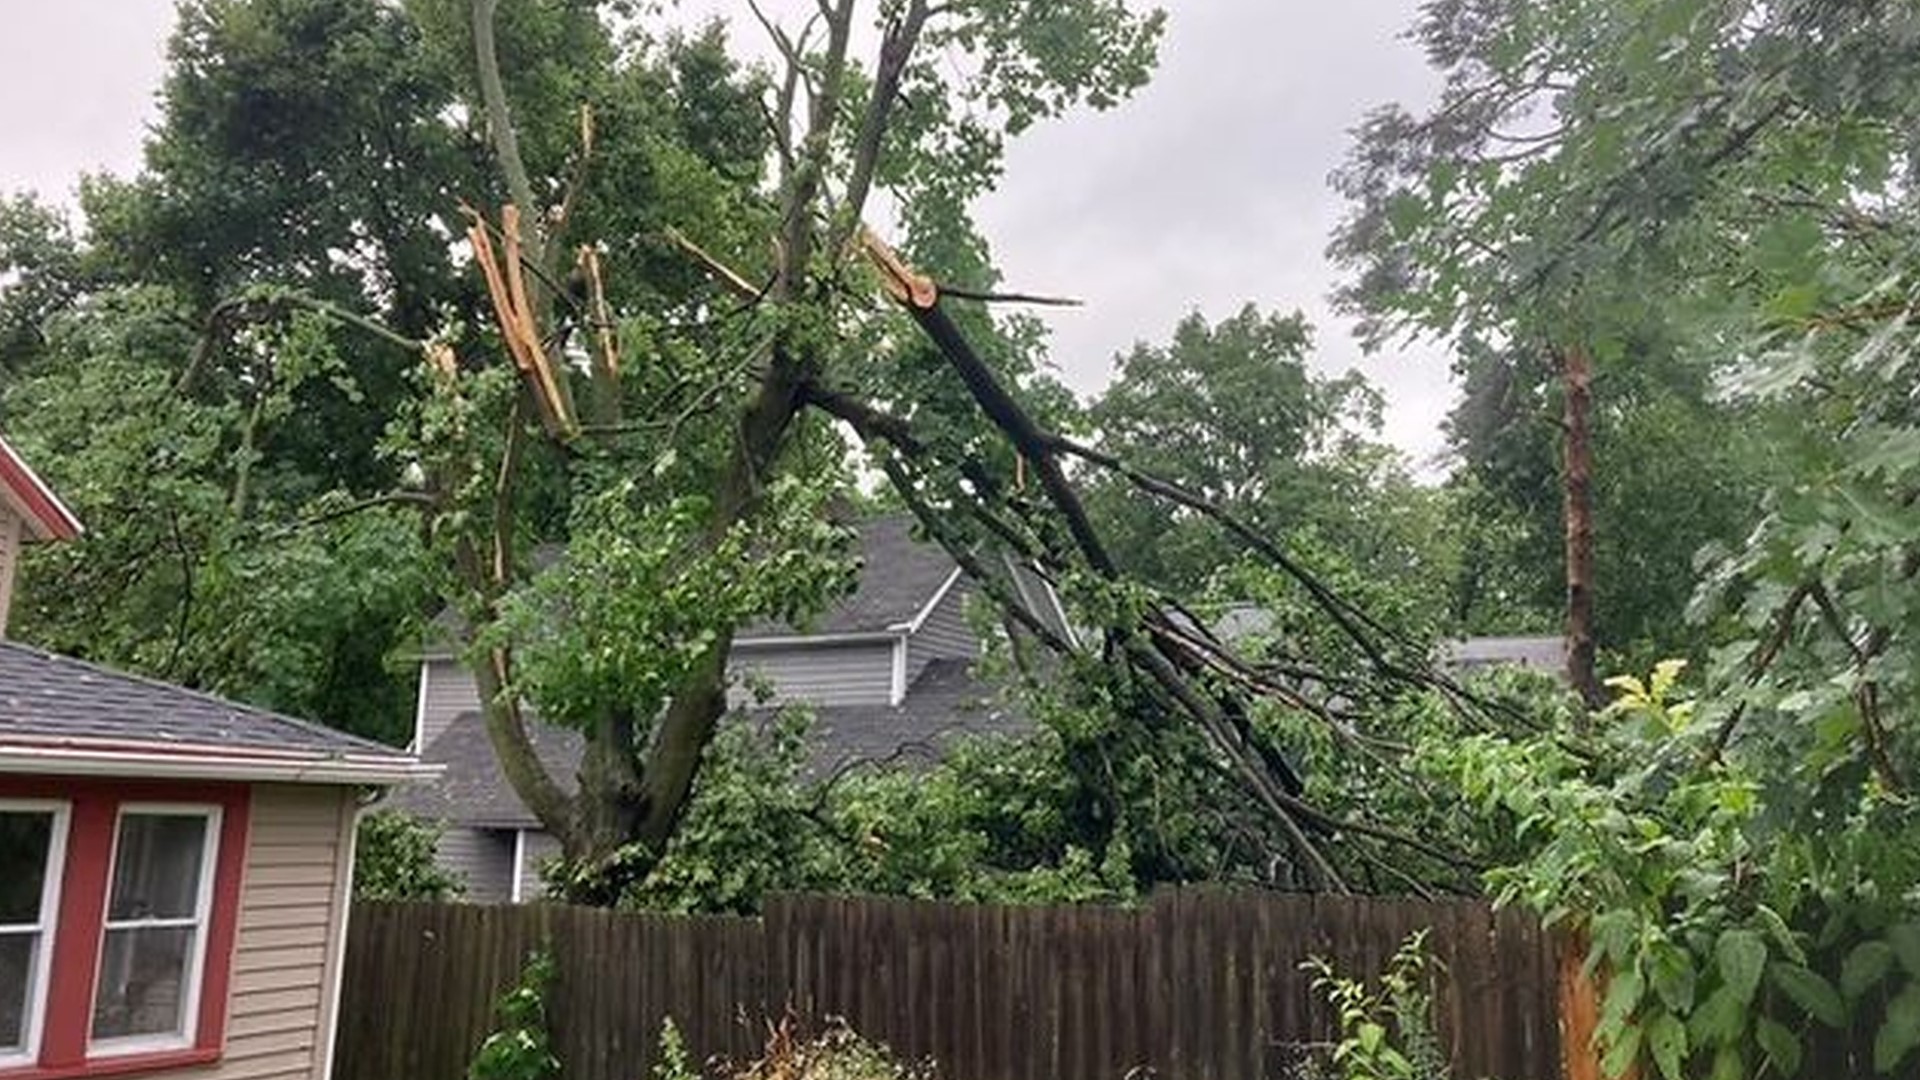 Thousands are still without power after storms rolled across West Michigan this weekend.